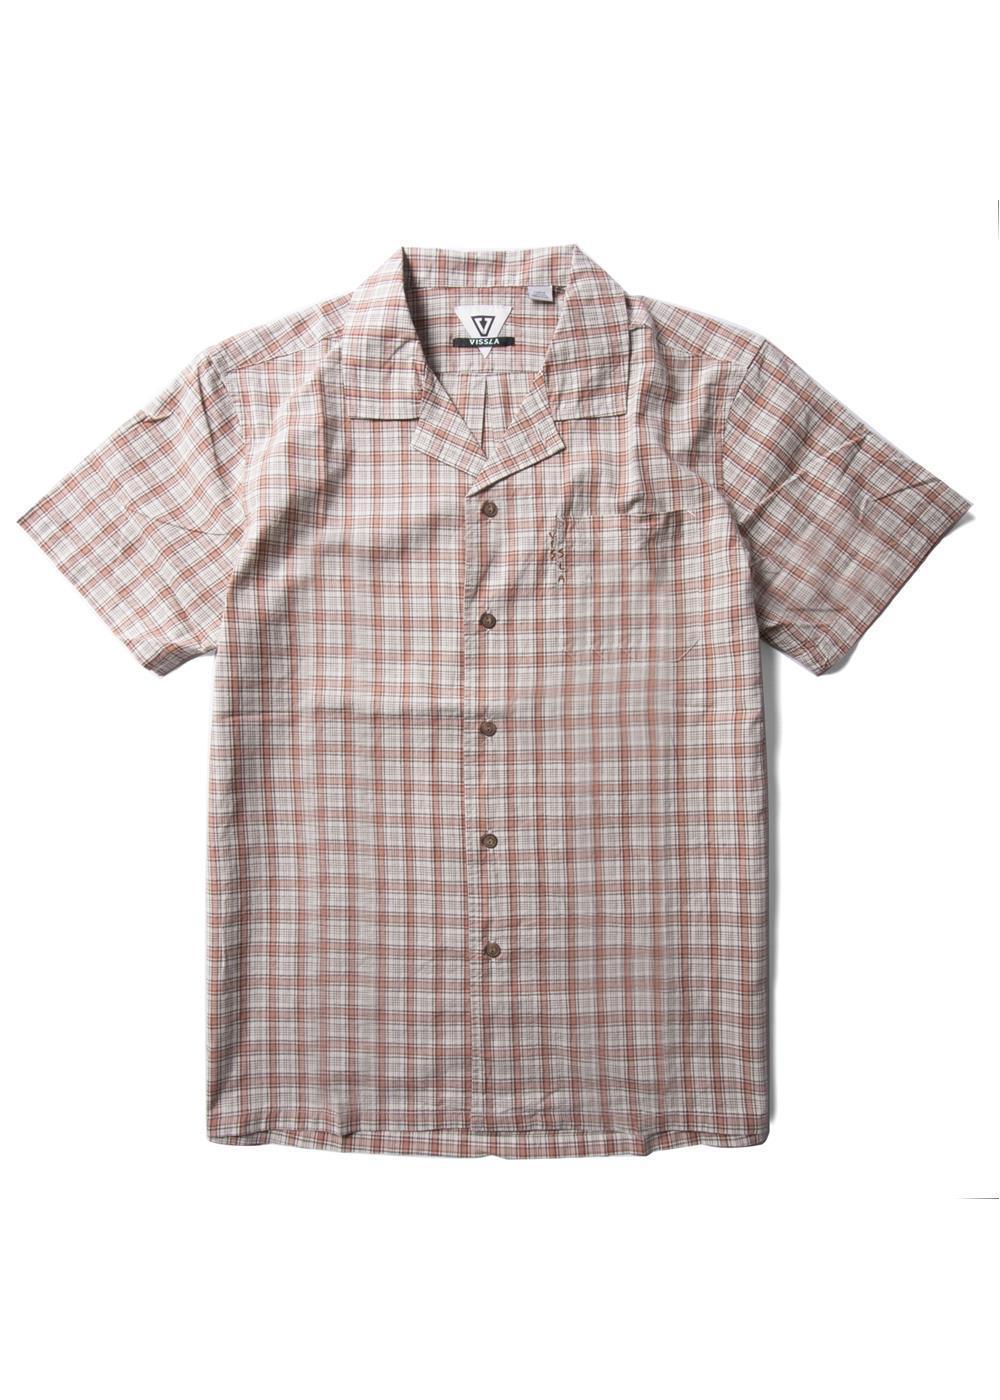 Undefined Lines Eco Ss Shirt